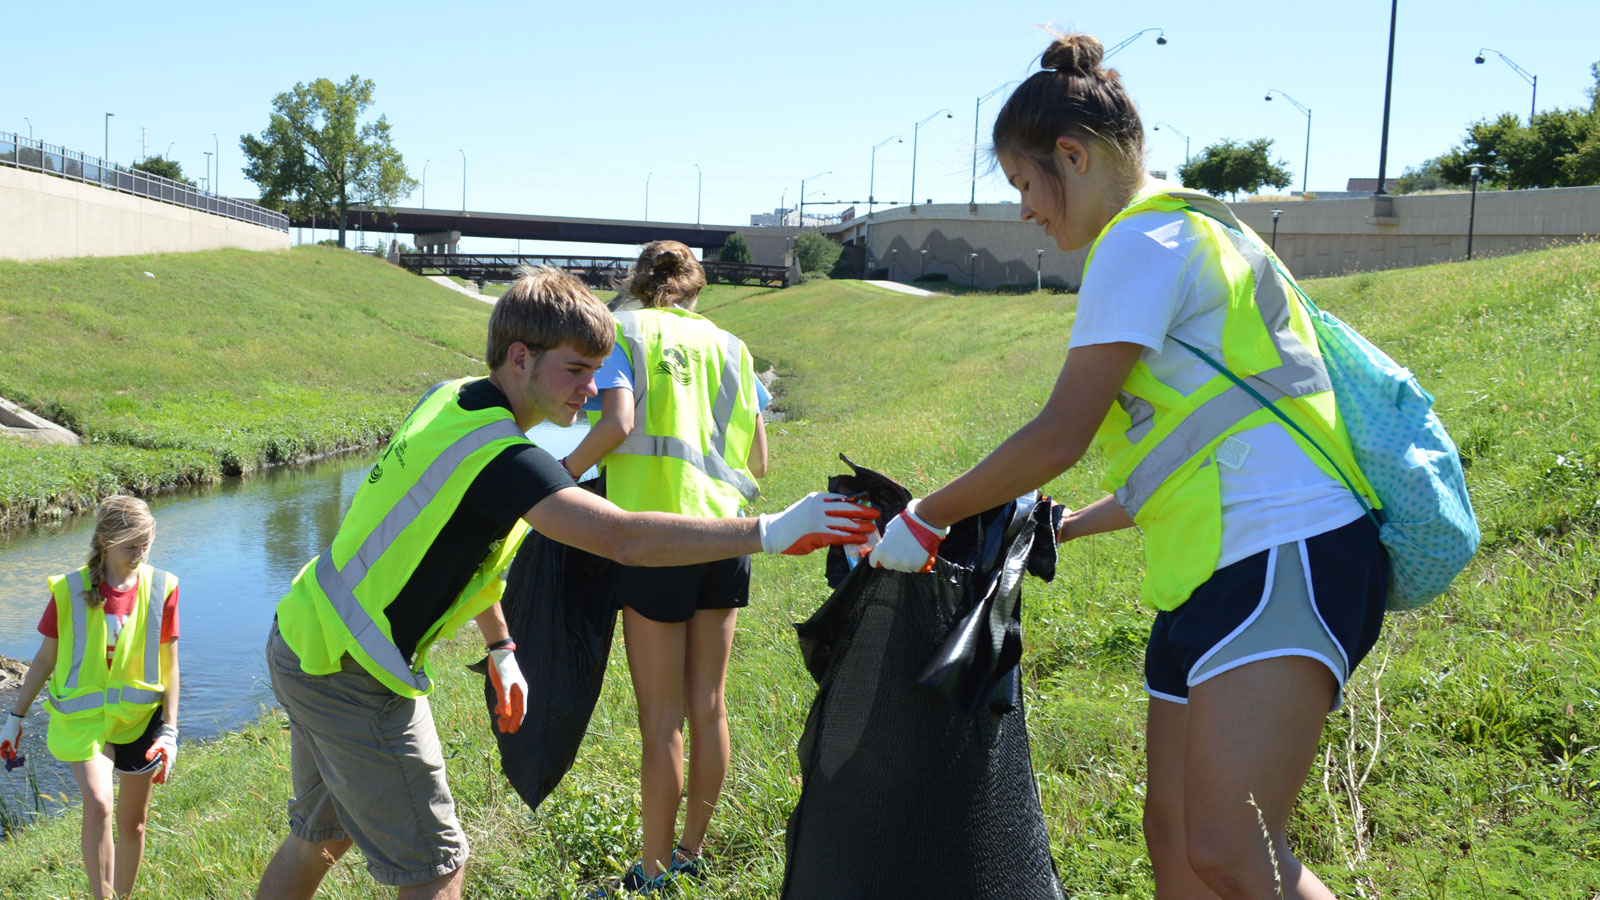 "University of Nebraska-Lincoln students volunteer as part of the 9/11 Day of Service and Remembrance